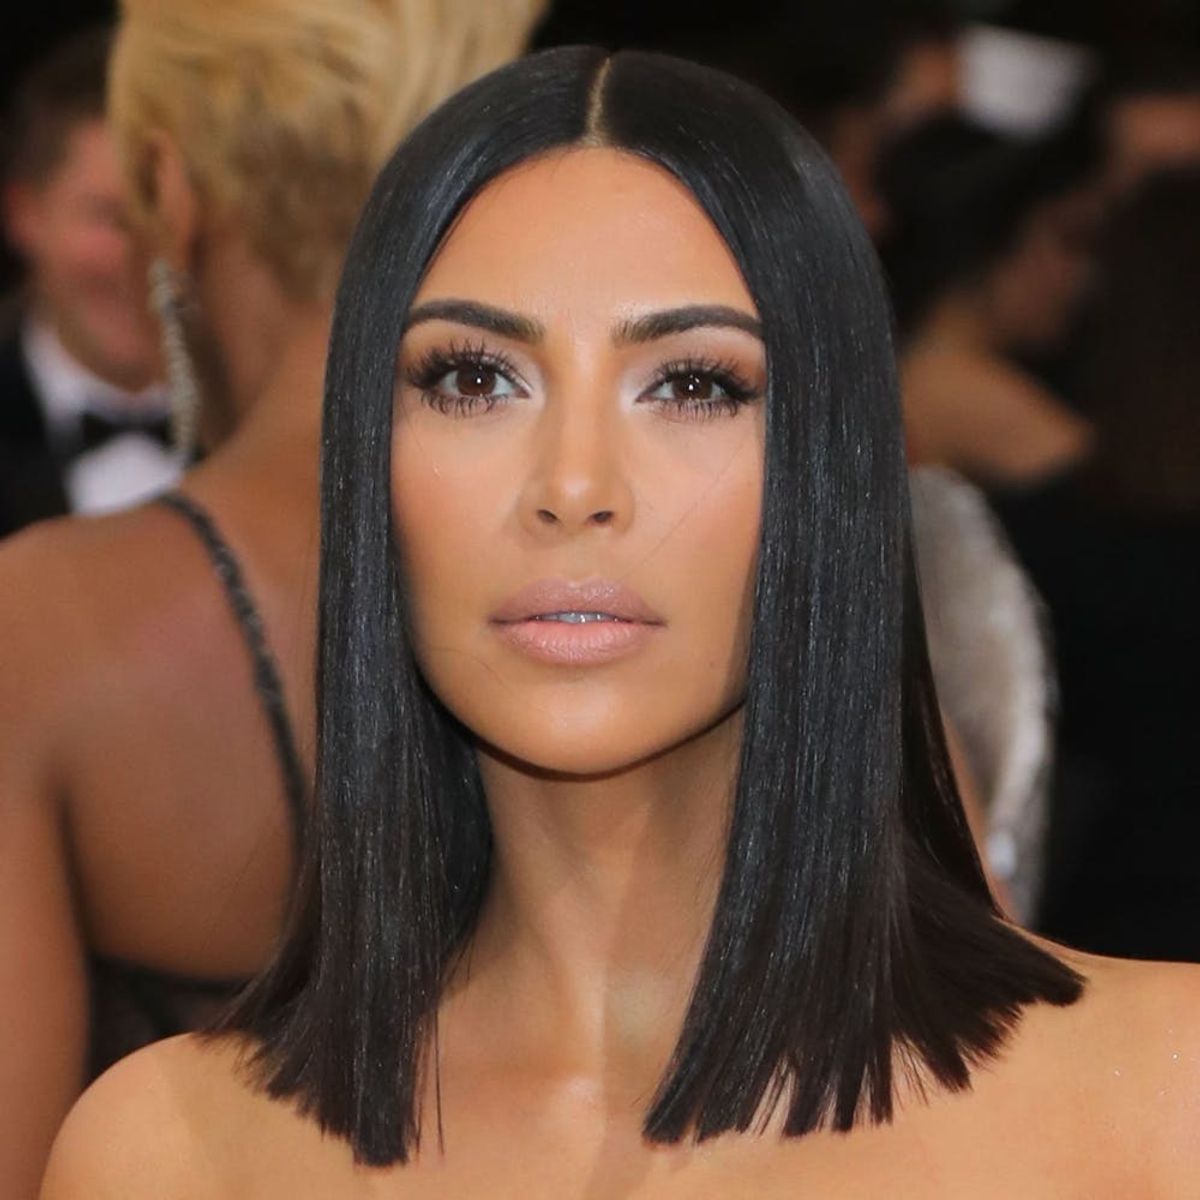 The Internet Is Angry at Kim Kardashian for Tweeting This After the Manchester Attacks